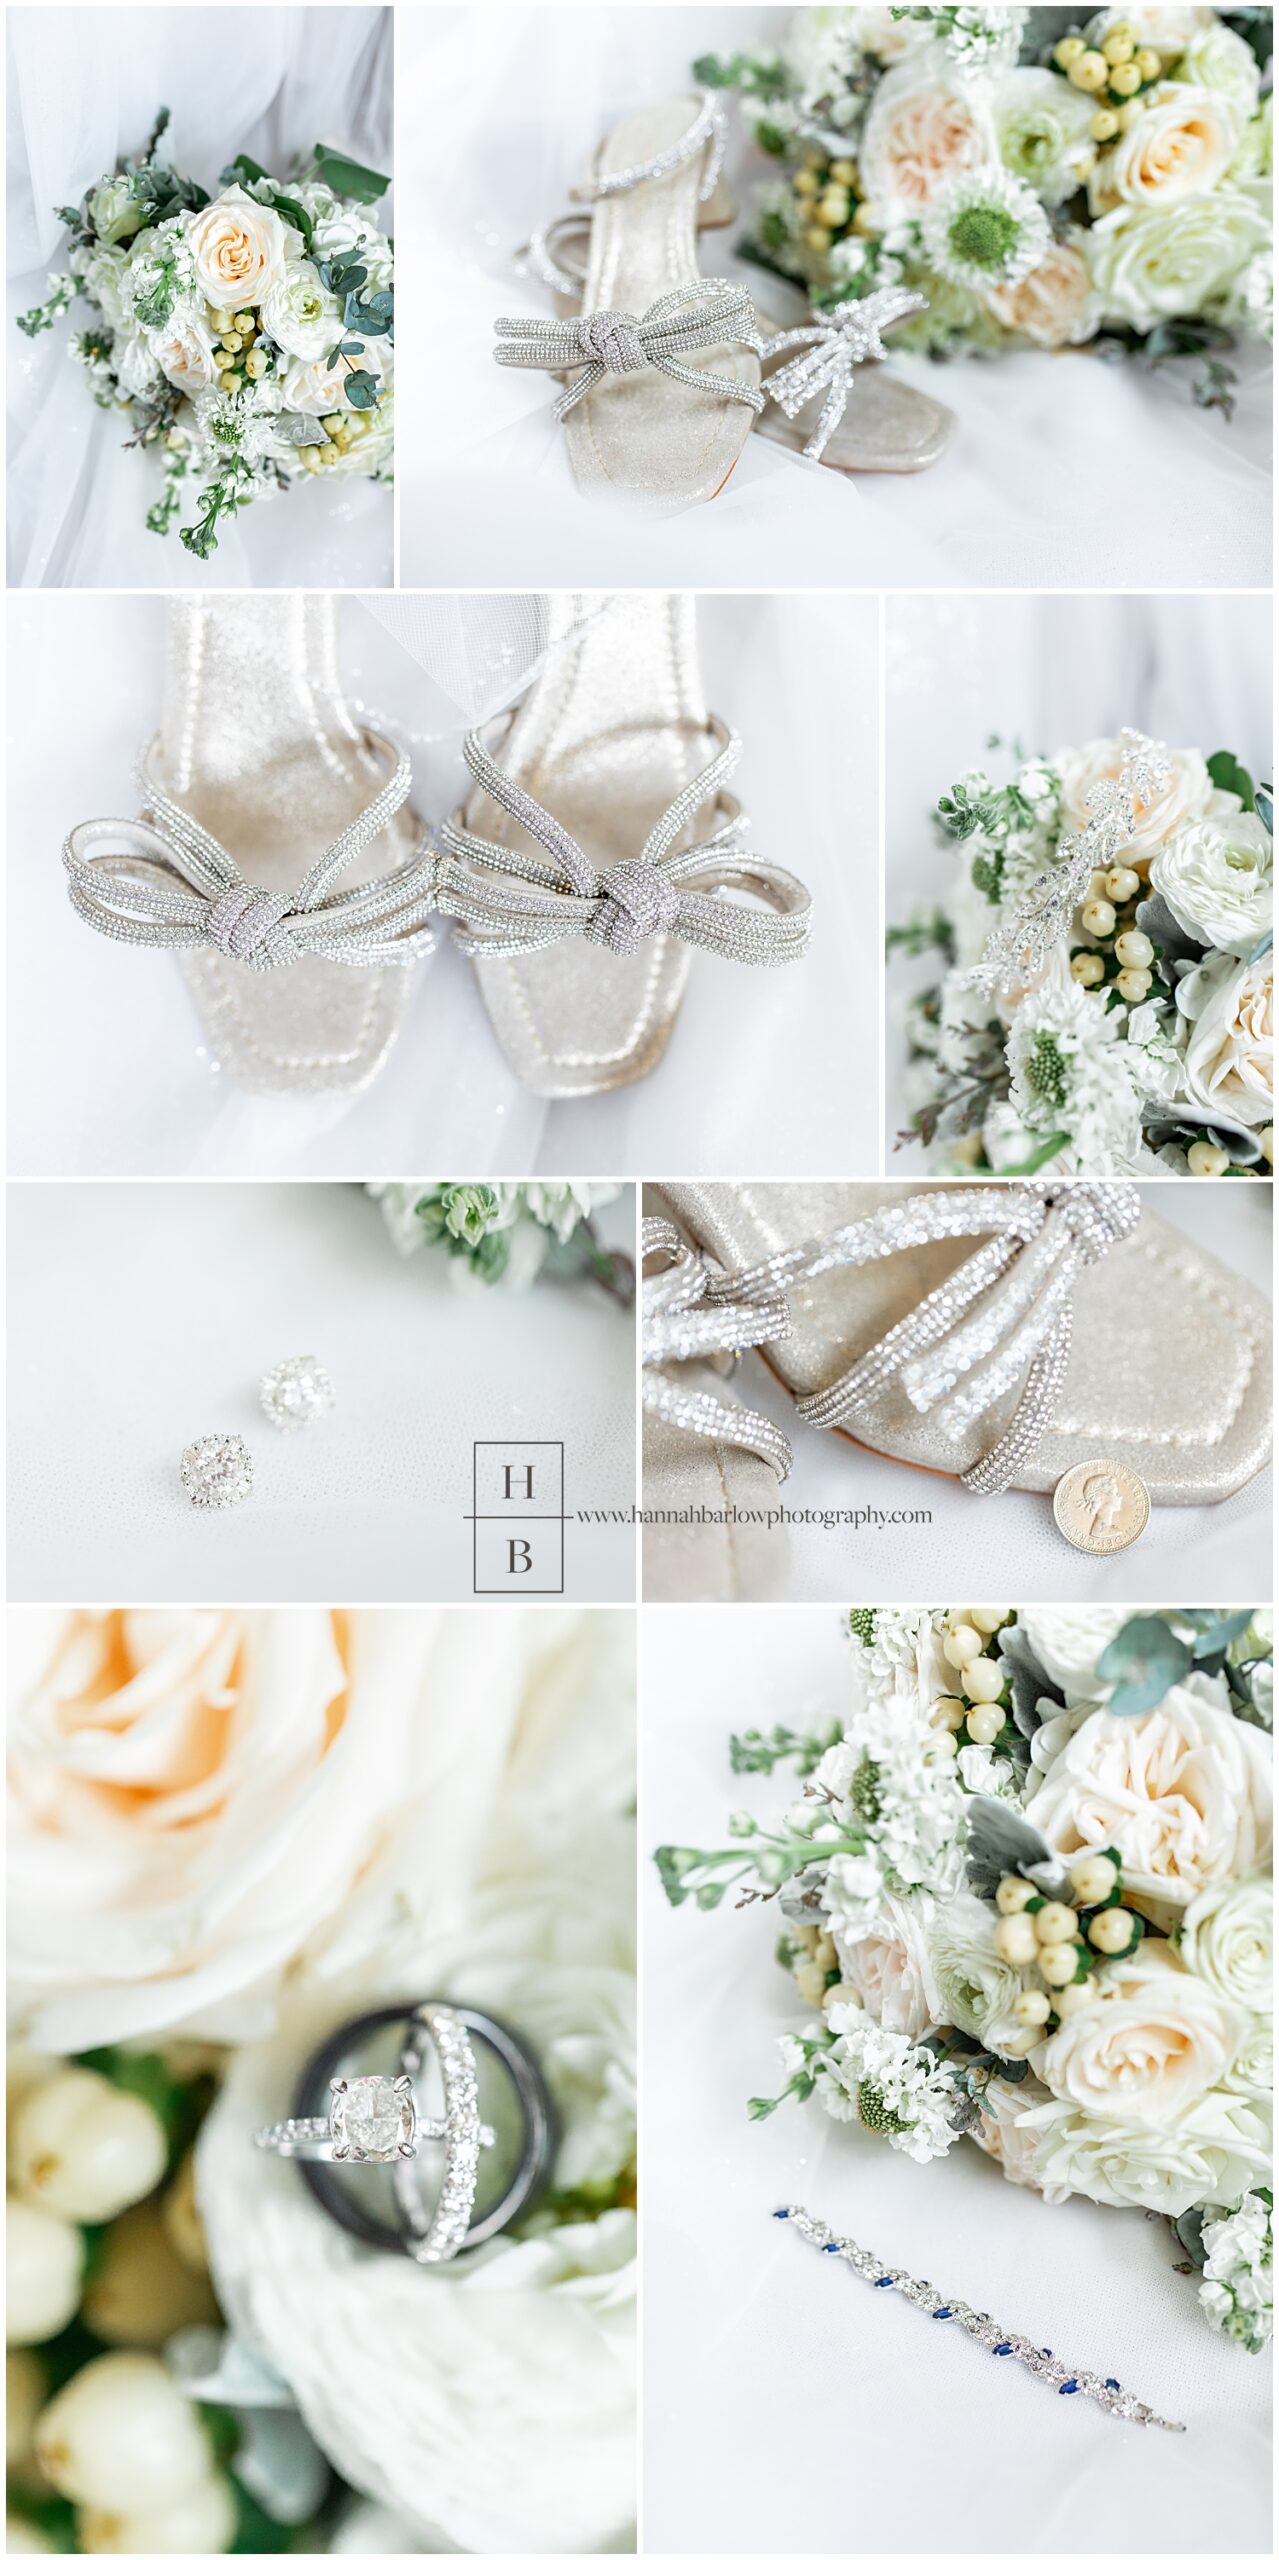 Bridal detail collage with white dress and glittery bow shoes.